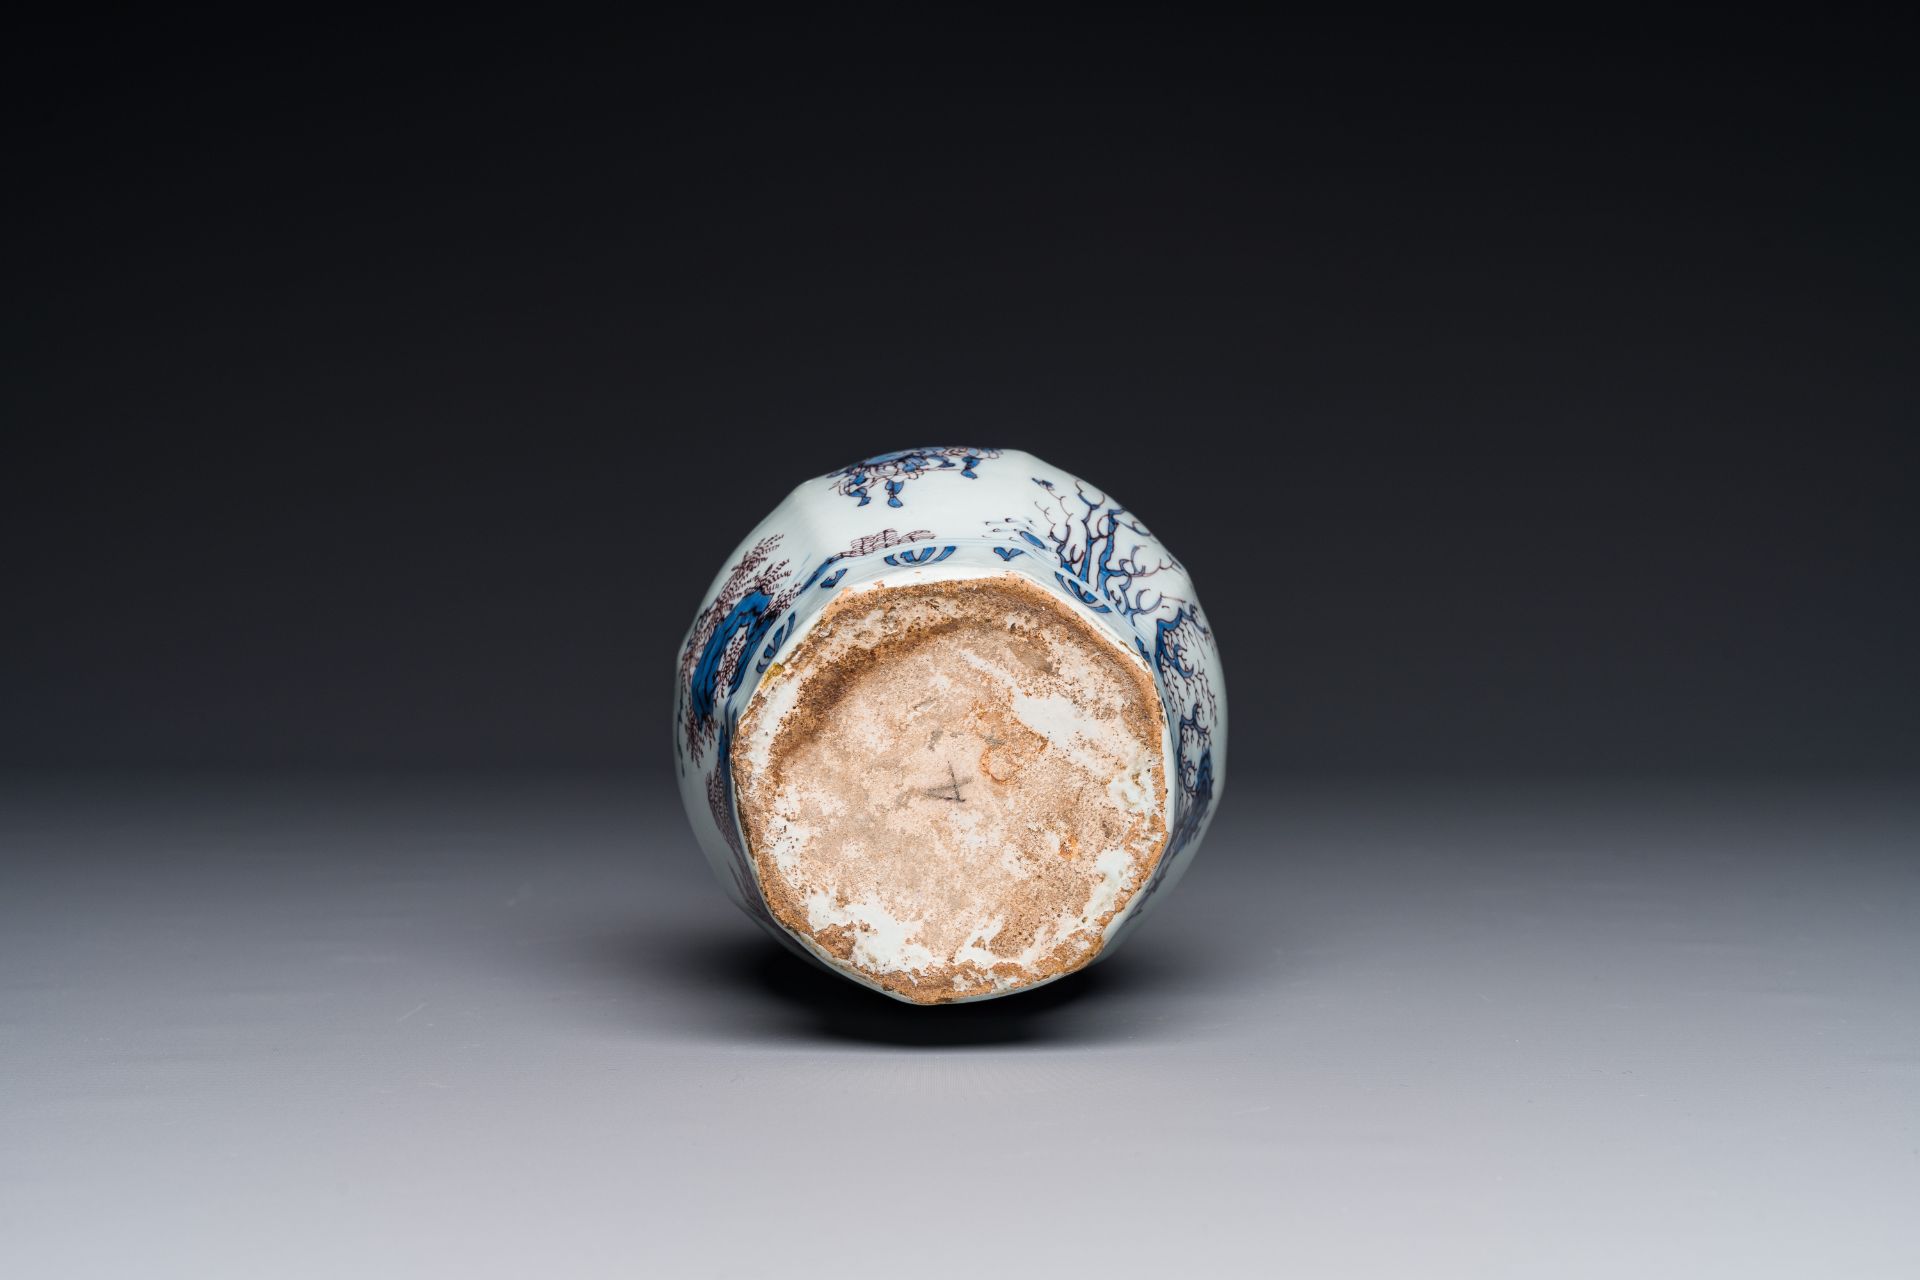 A fine Dutch Delft blue, white and manganese chinoiserie bottle vase, late 17th C. - Image 6 of 7